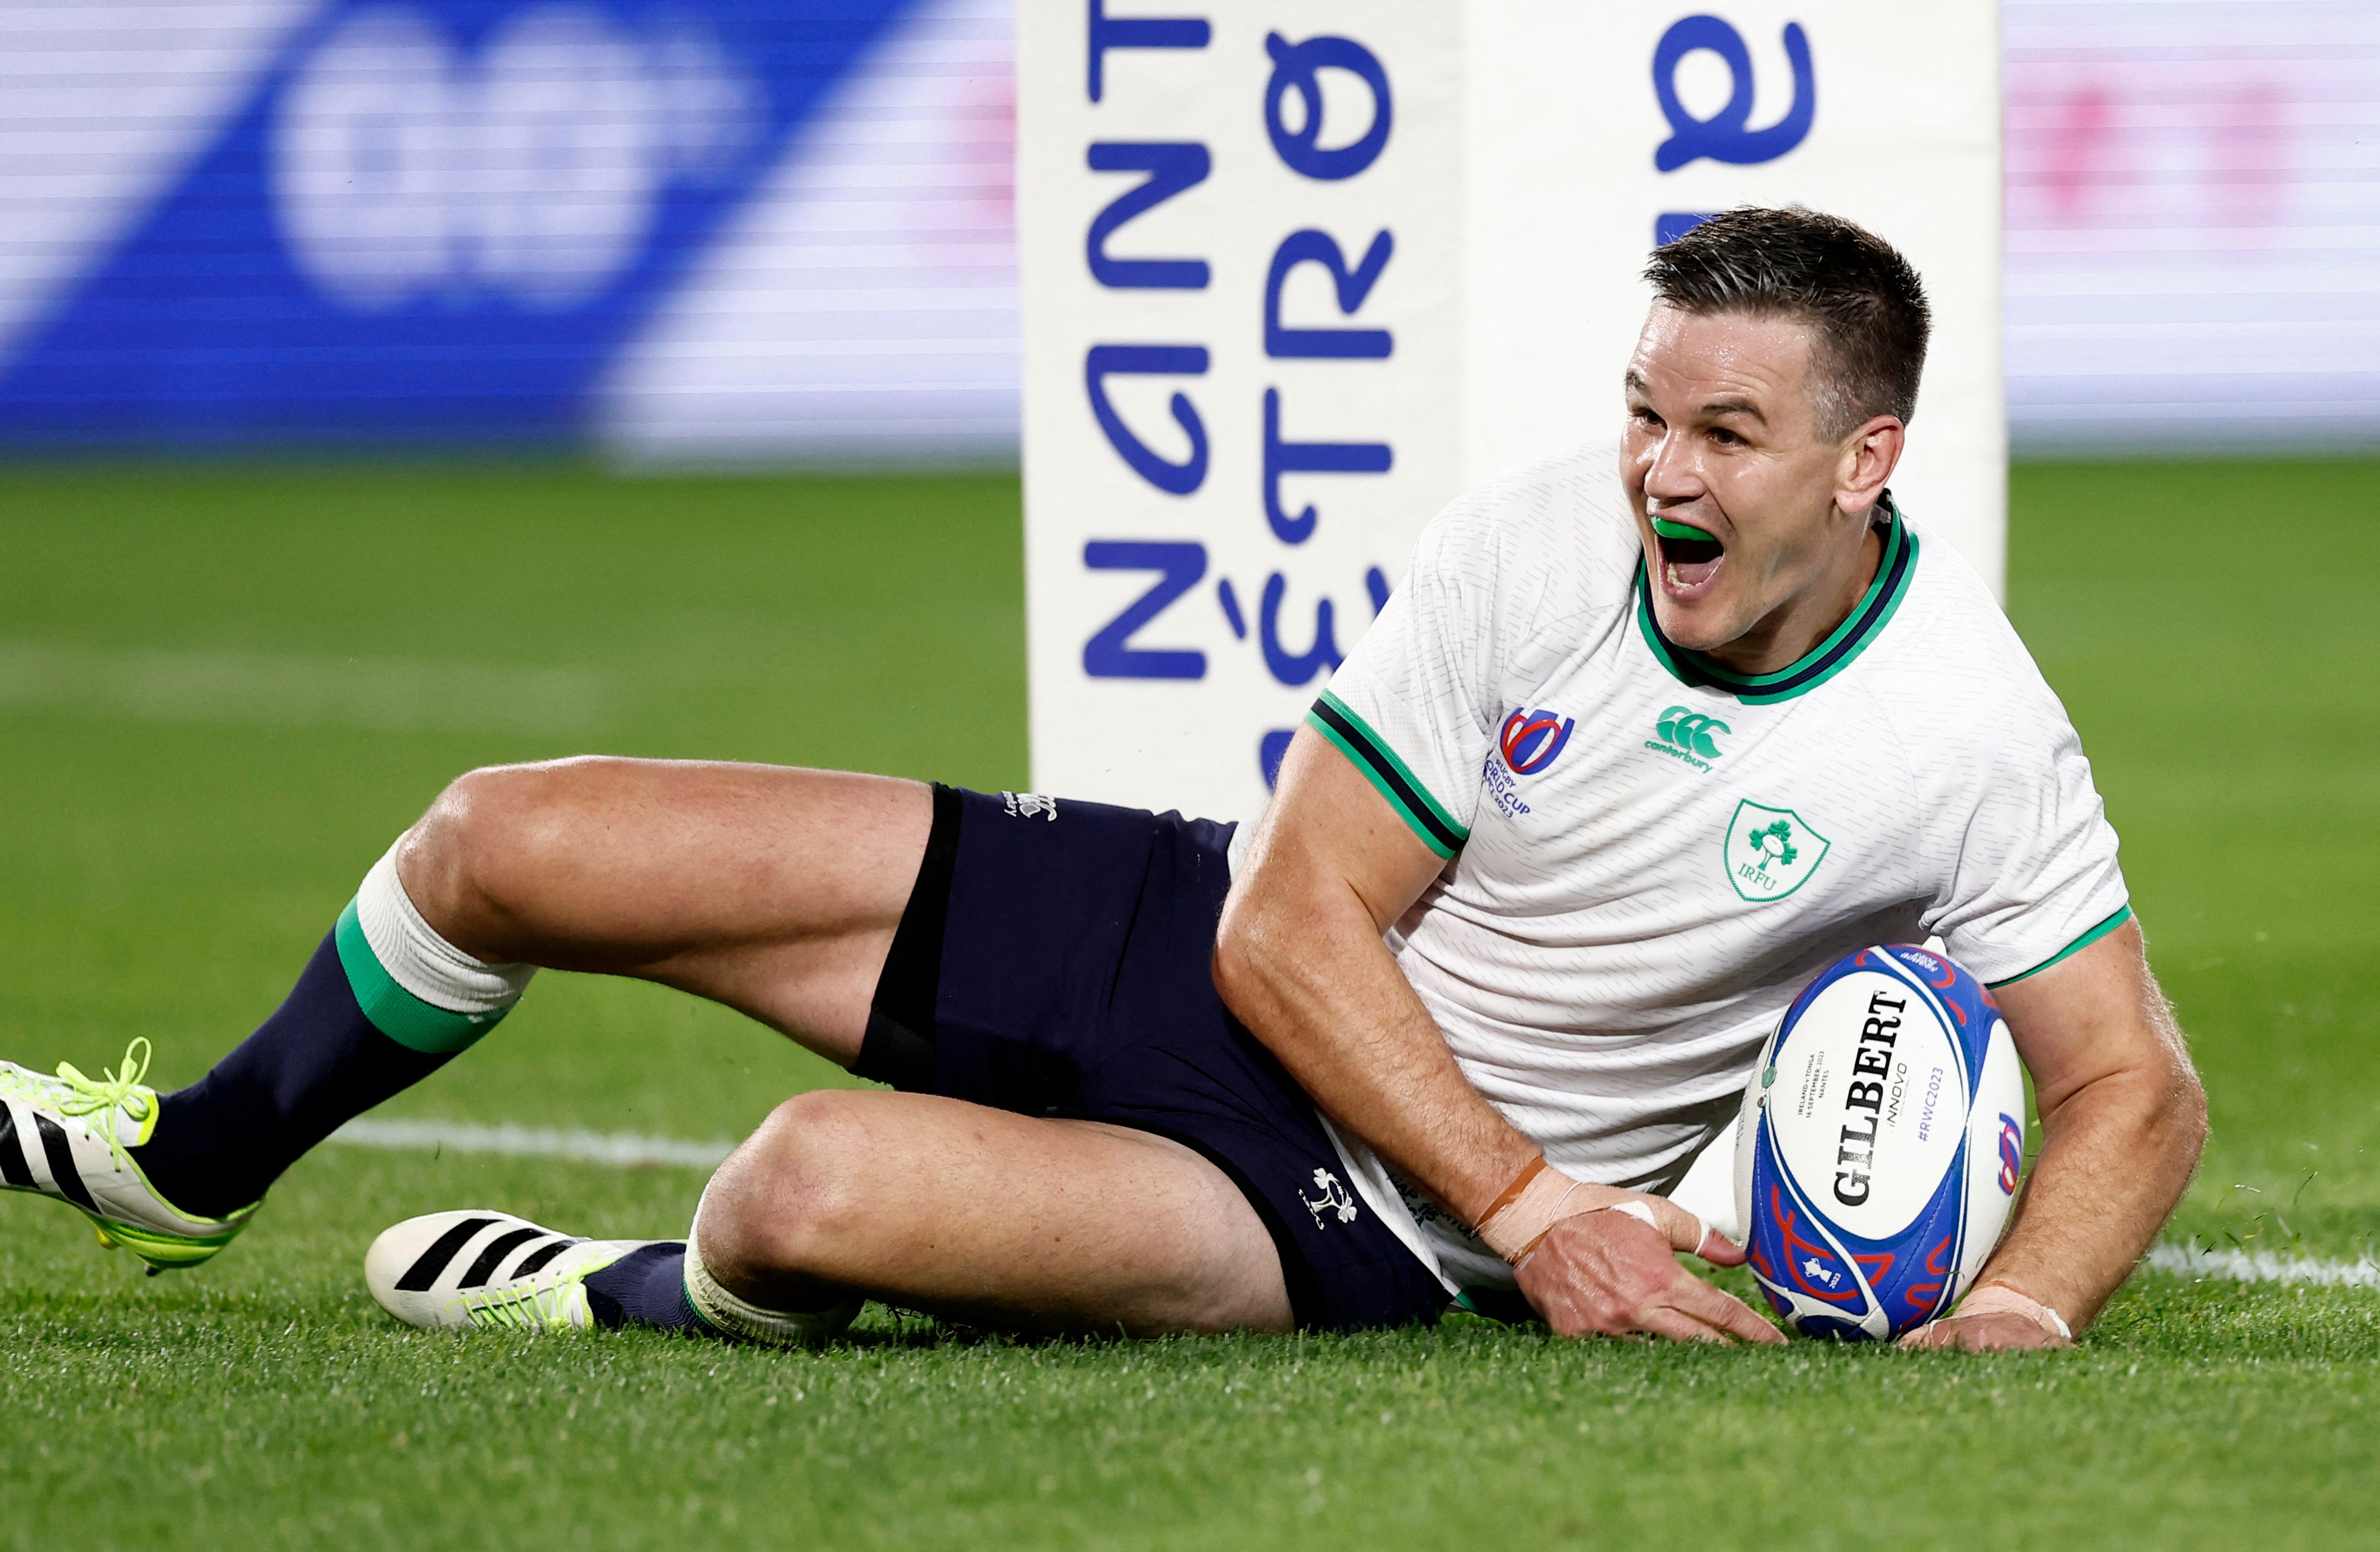 Ireland vs Tonga LIVE Rugby World Cup result and reaction as Johnny Sexton breaks points scoring record The Independent